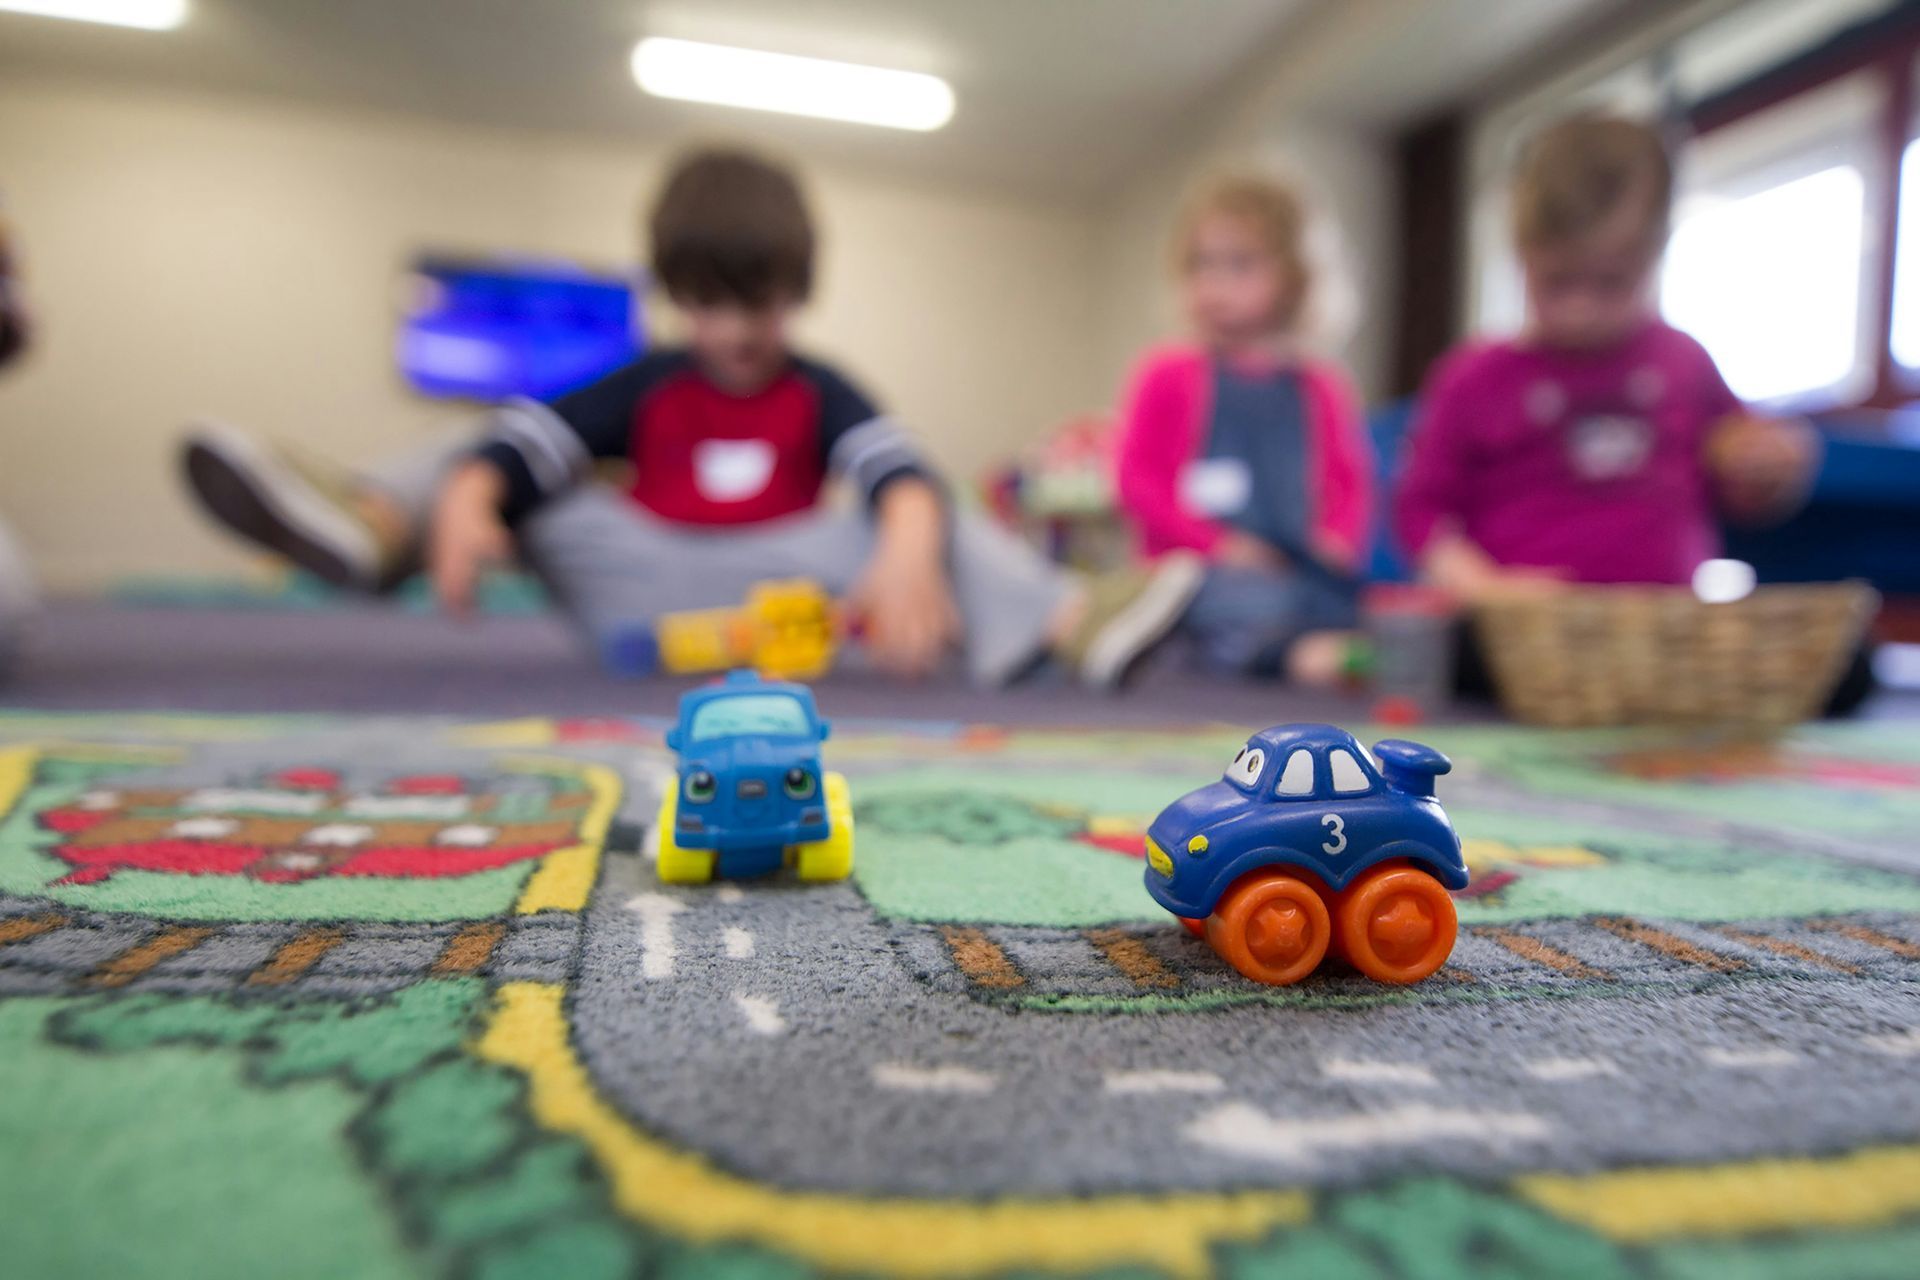 A group of children are playing with toy cars on a rug.